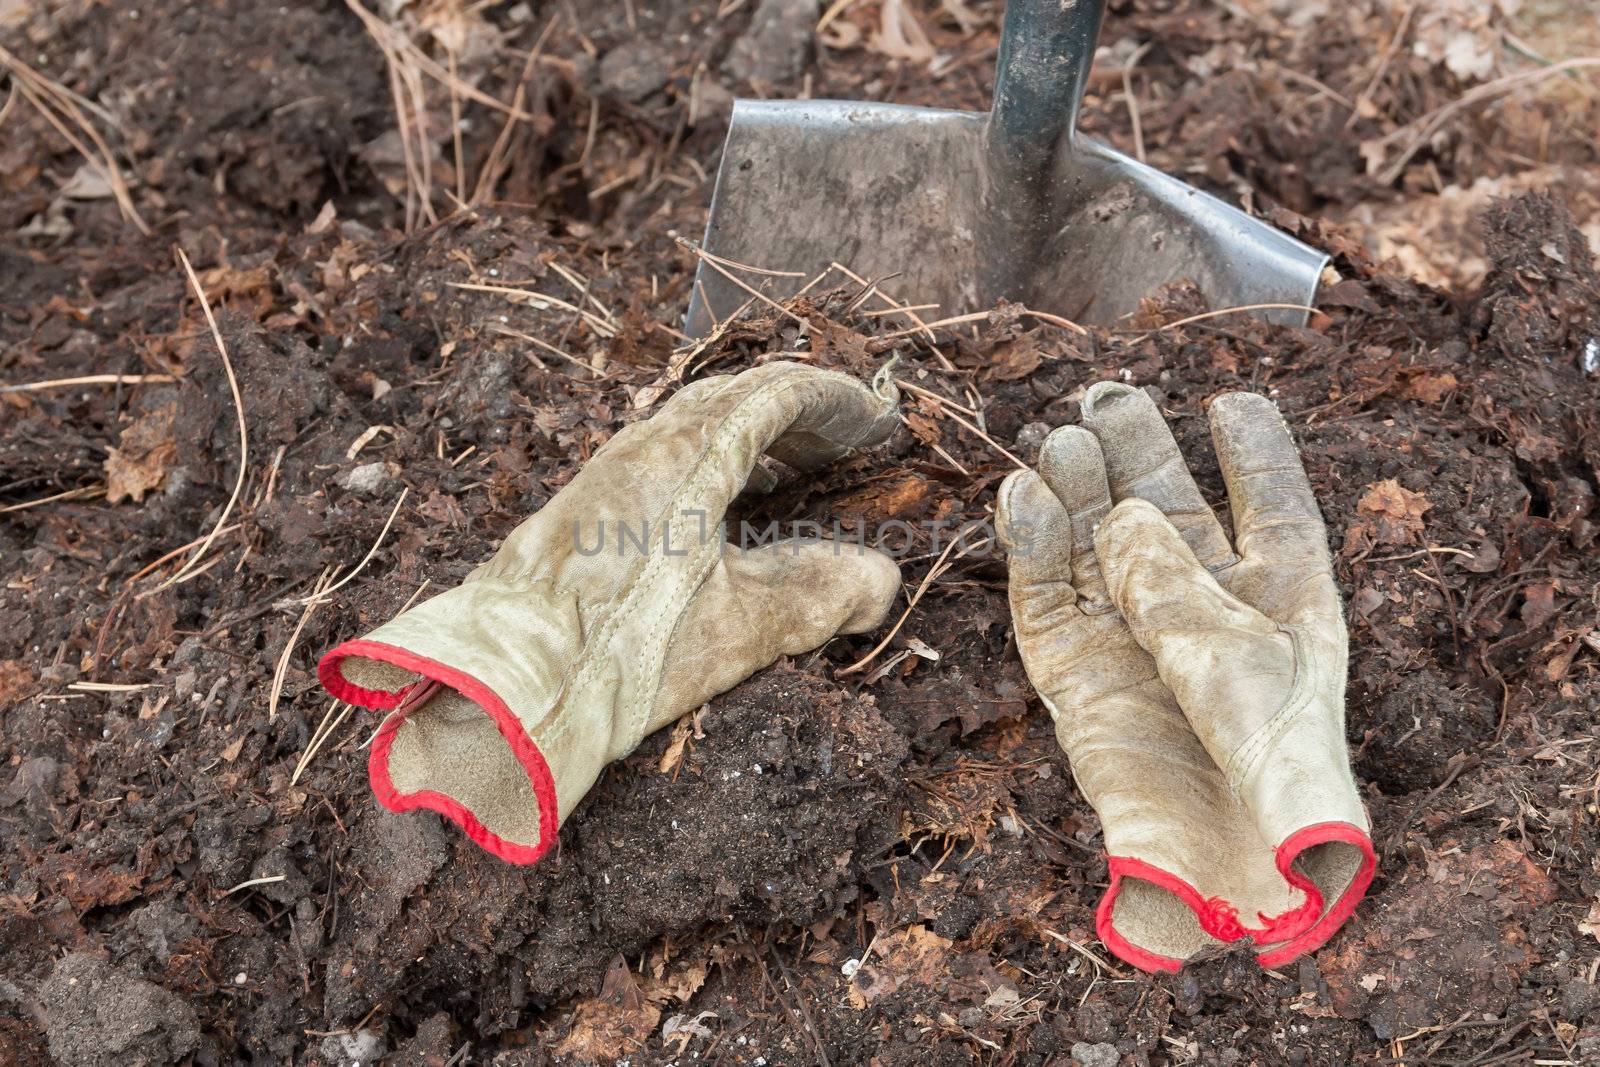 Two Worn Gloves Atop Compost Pile by a Shovel